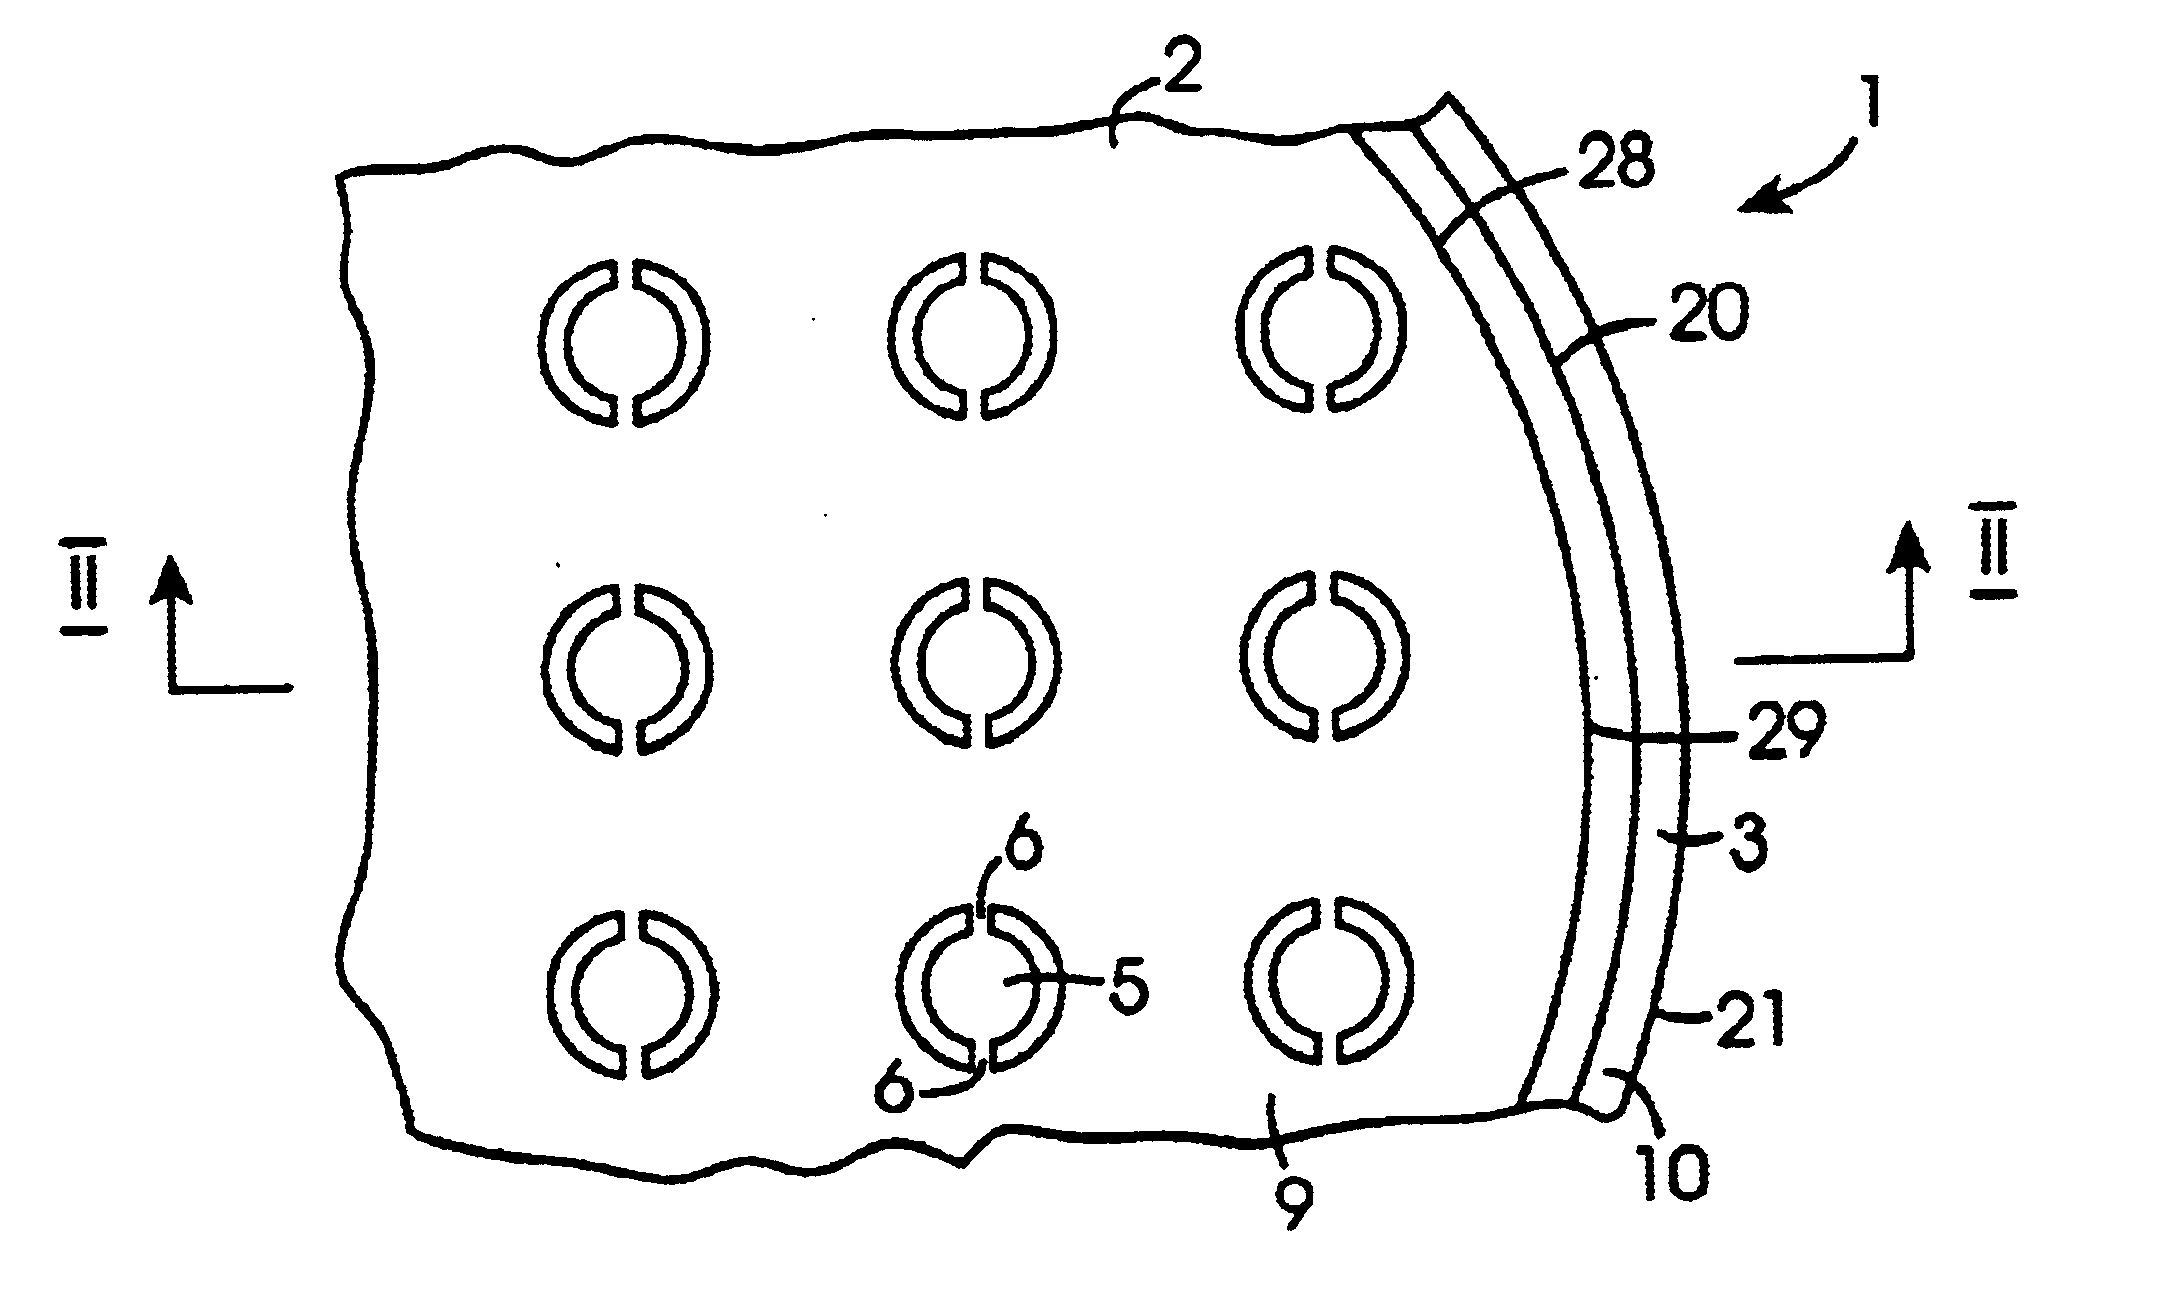 Composite semiconductor wafer and a method for forming the composite semiconductor wafer